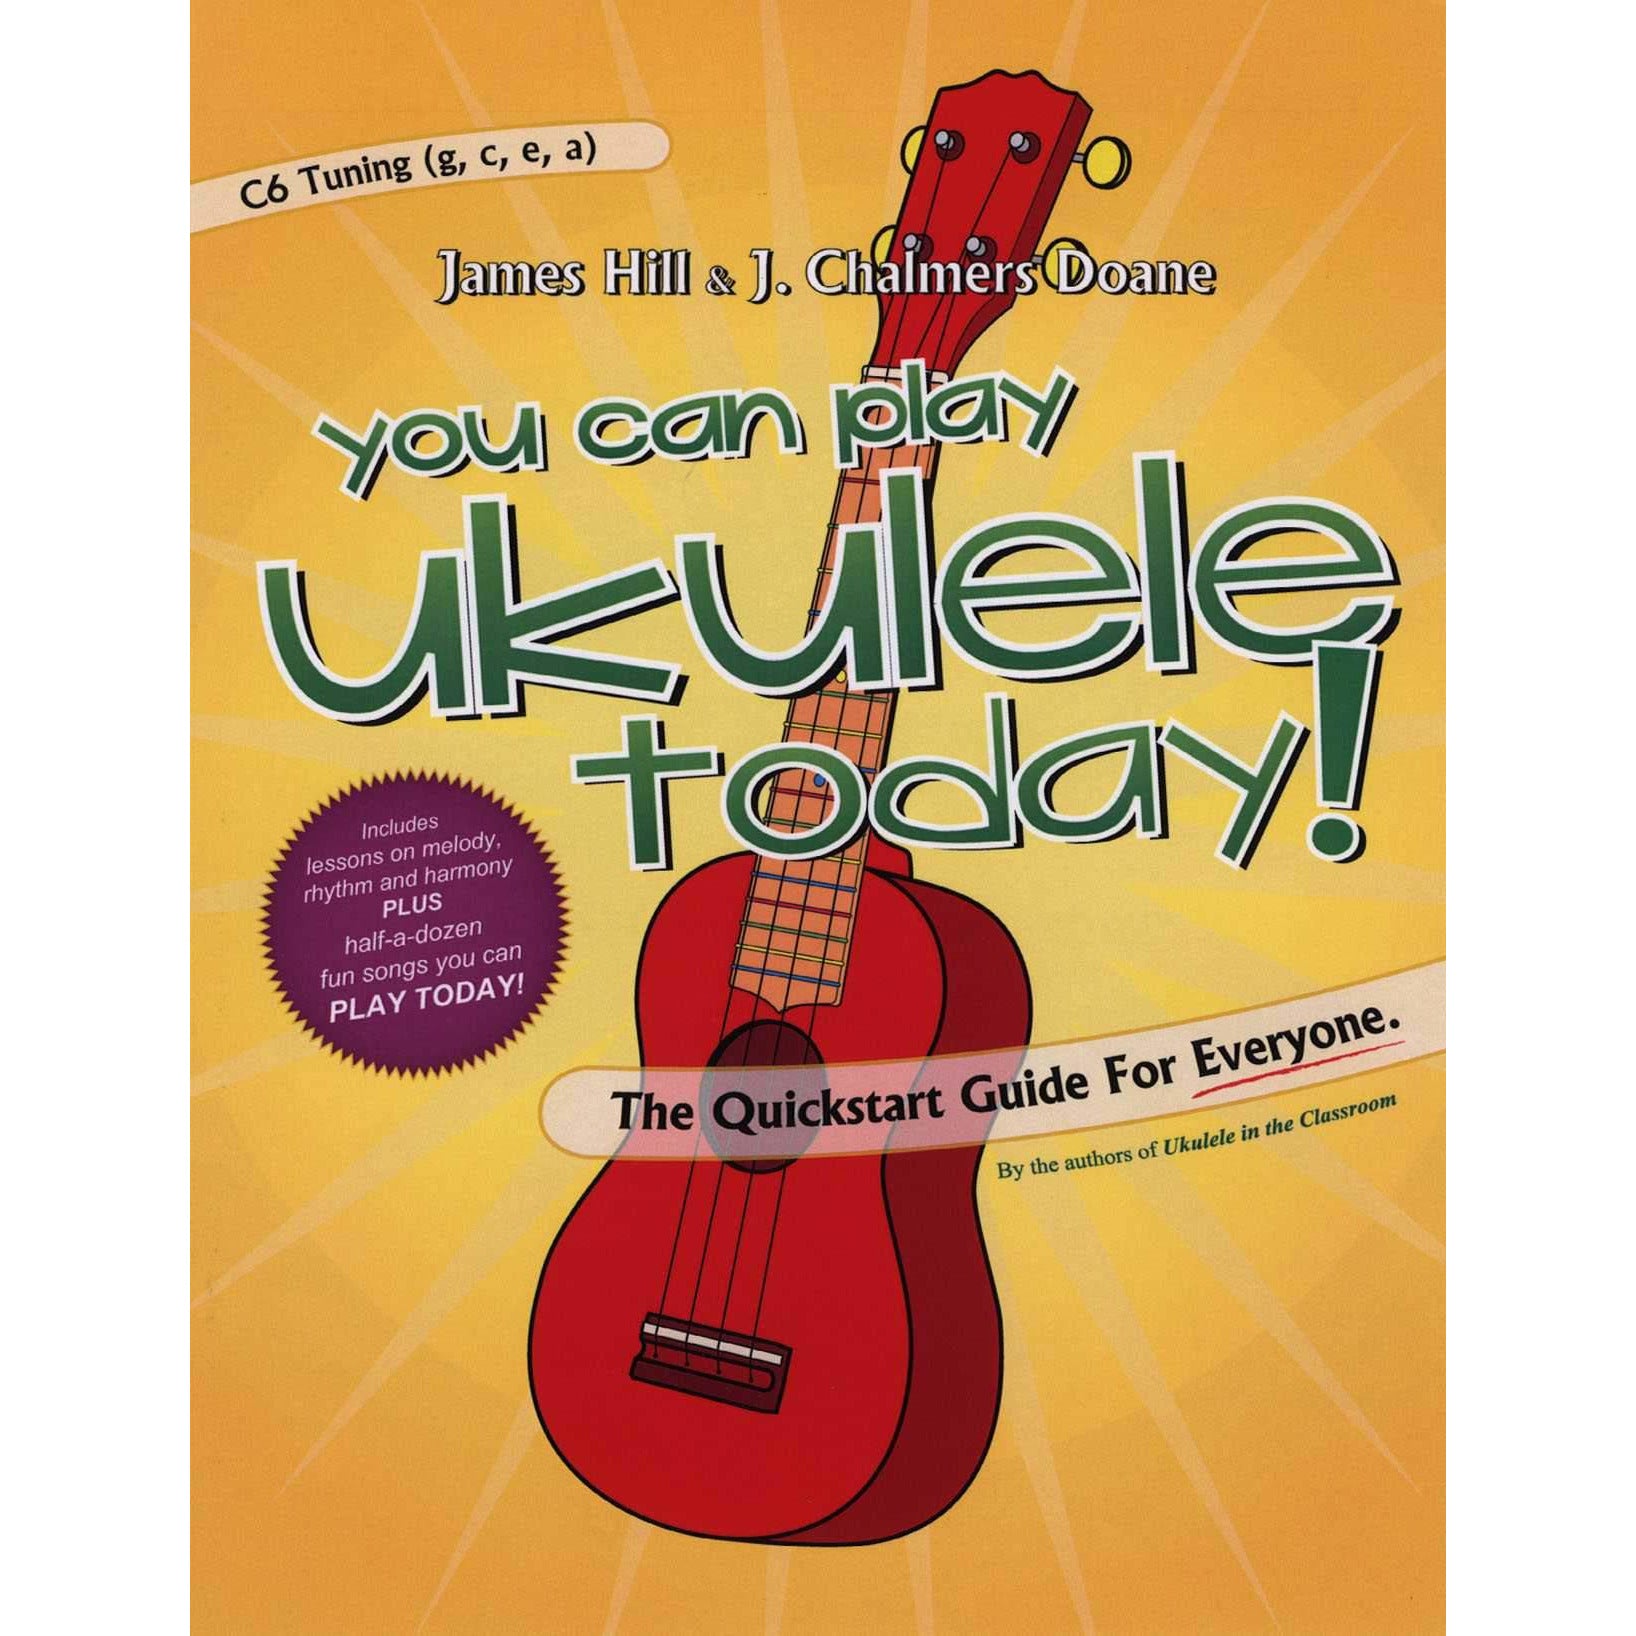 Image 1 of You Can Play Ukulele Today!-The Quickstart Guide for Everyone - SKU# 798-10 : Product Type Media : Elderly Instruments